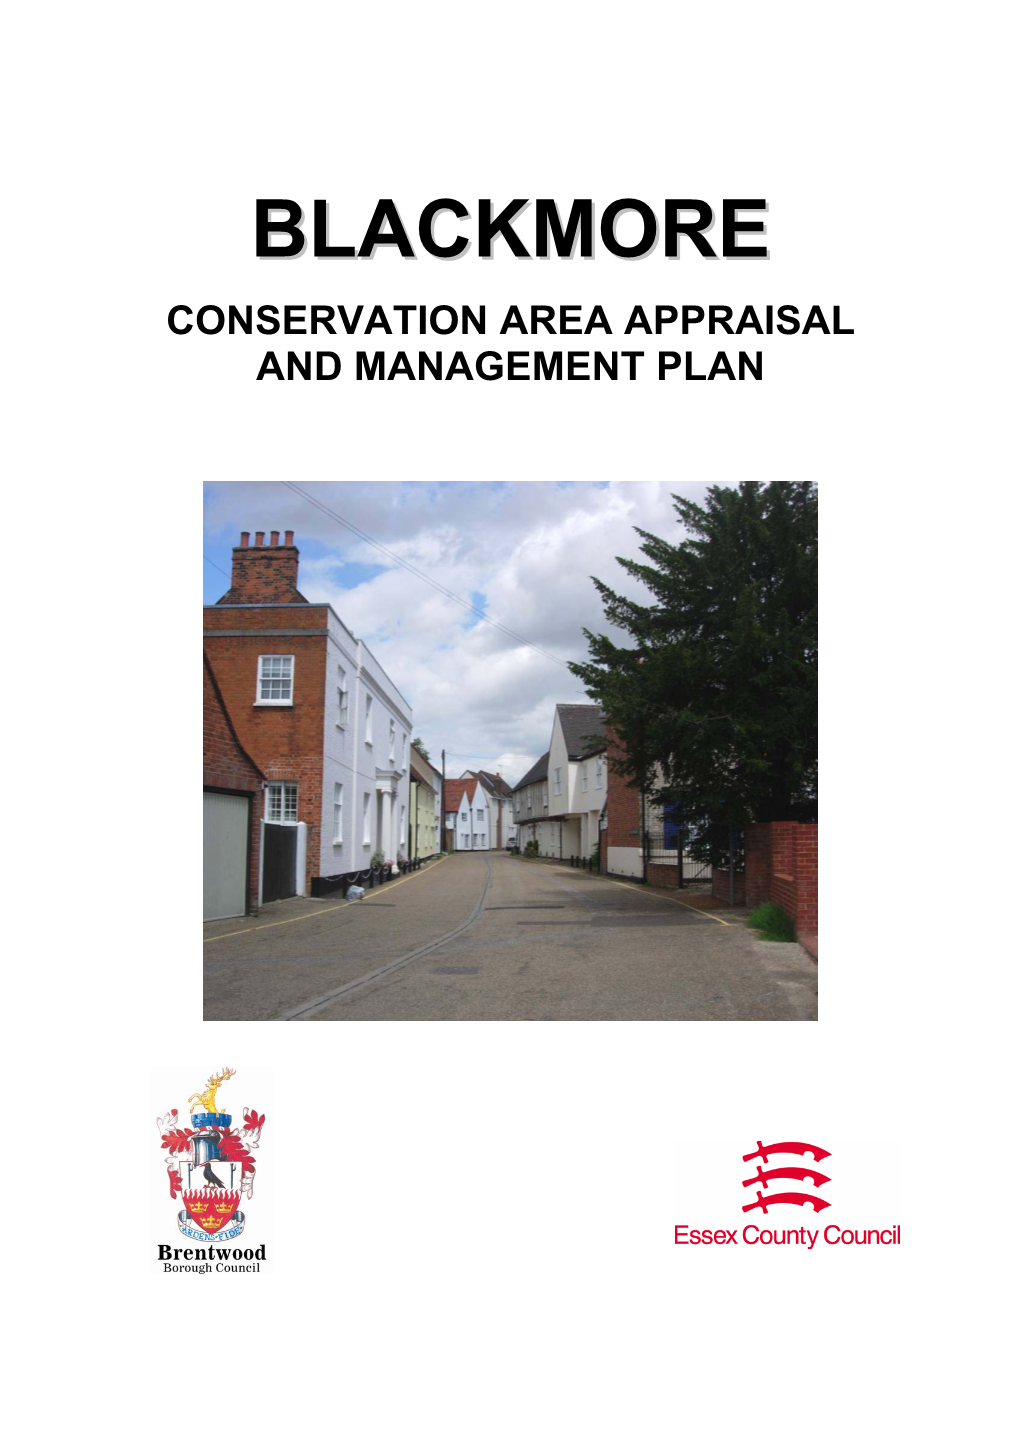 Blackmore Conservation Area Character Appraisal